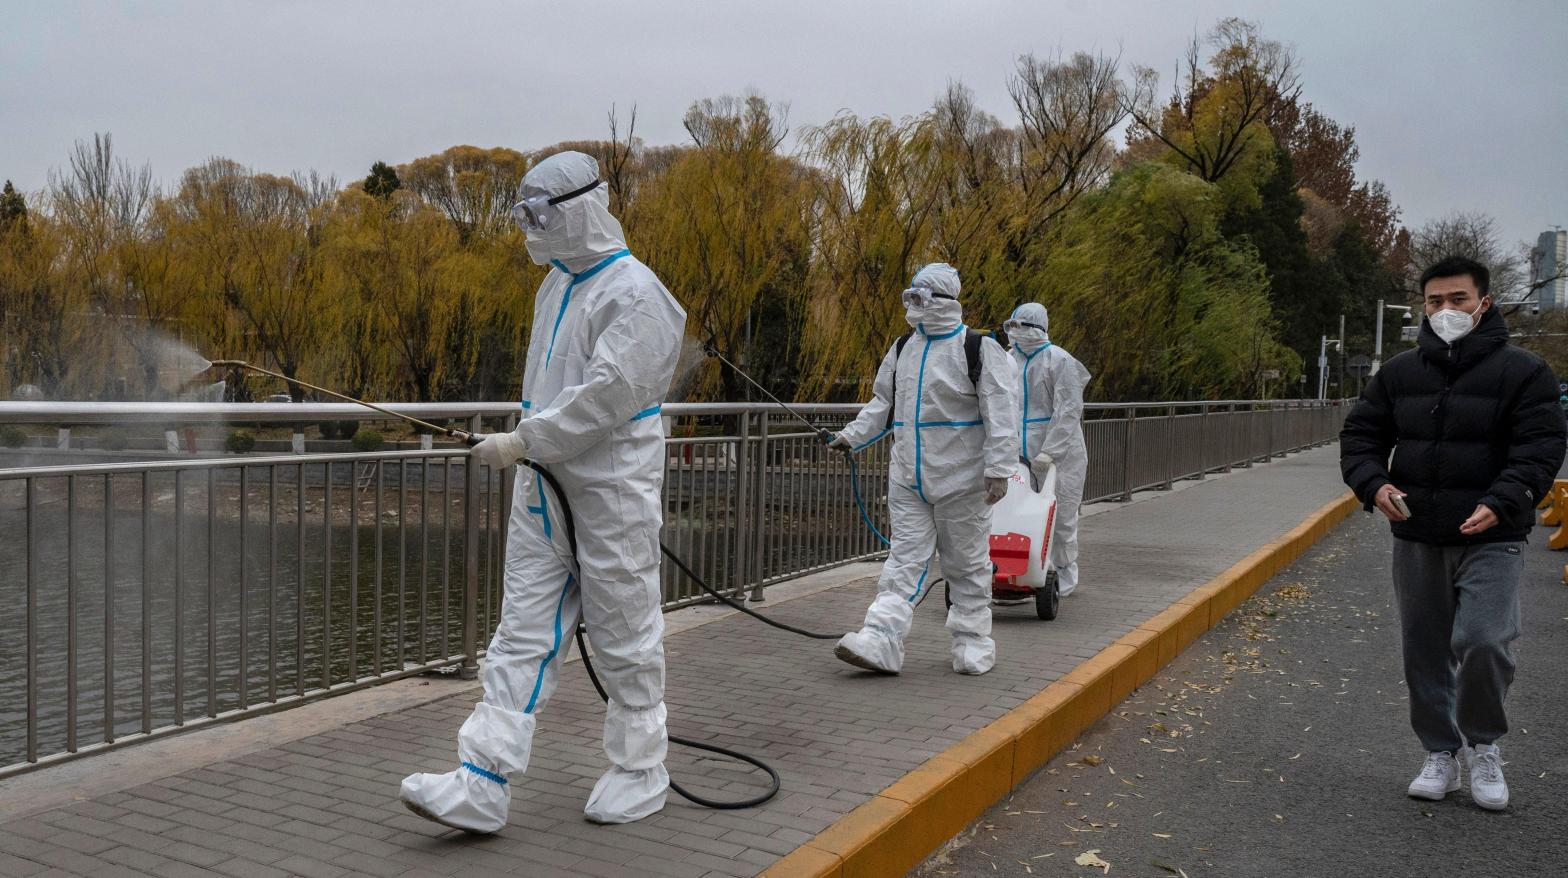 Epidemic control workers wear PPE to protect against the spread of covid-19 as they disinfect an area on the Liangma River, a popular spot for local residents and the site of a protest against covid measures the day before, on November 28, 2022  (Photo: Kevin Frayer, Getty Images)